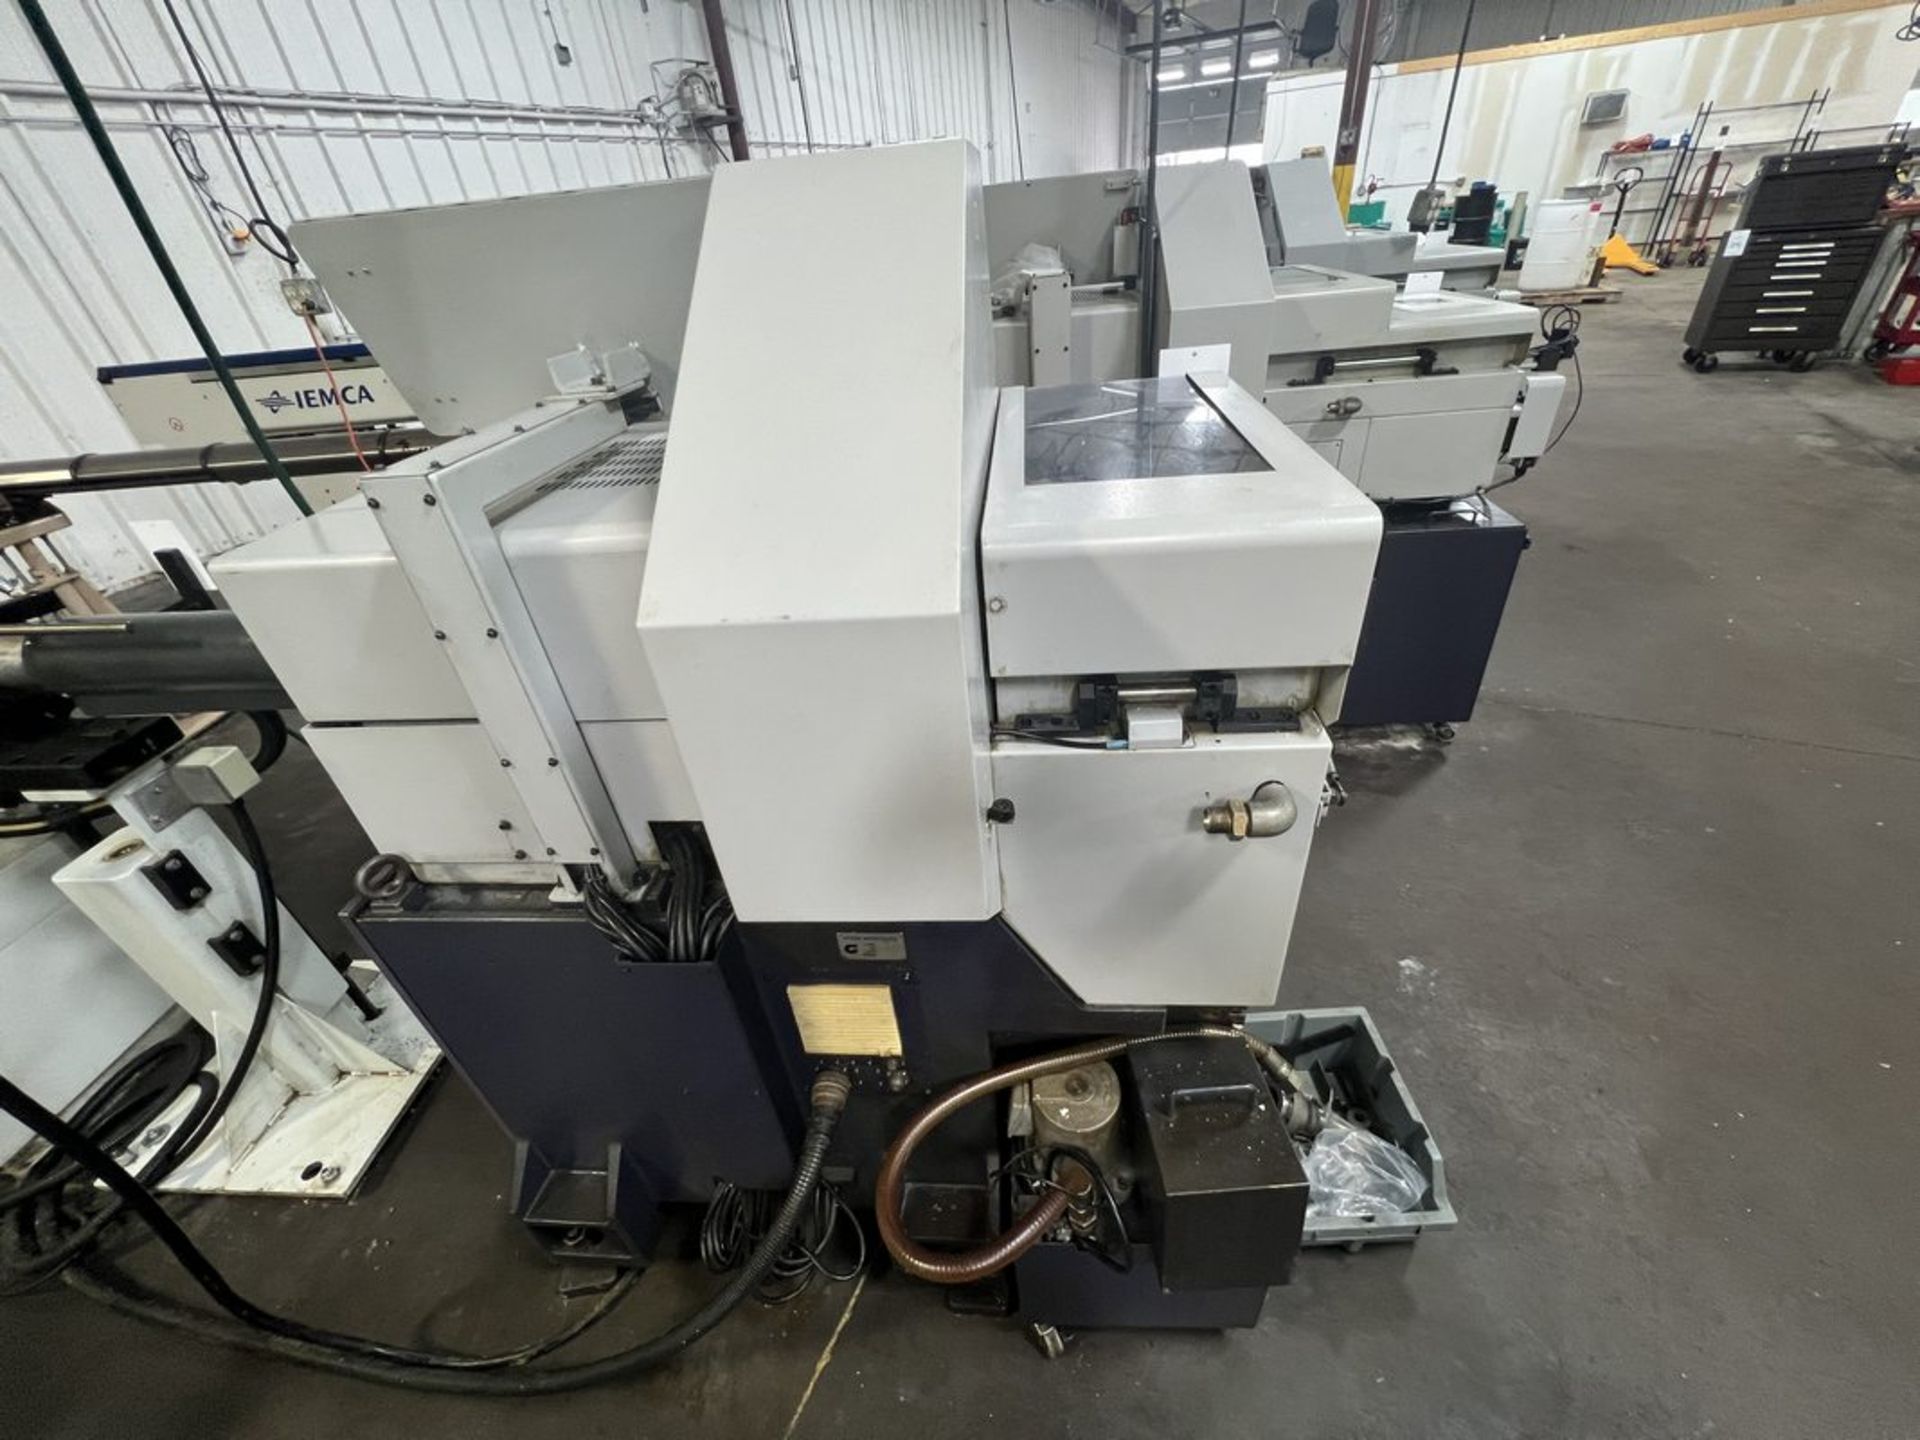 Citizen B-12 Type I, 12 mm (1/2") 3-Axis CNC Swiss Lathe, S/N Z3506, 1997 - Image 11 of 14